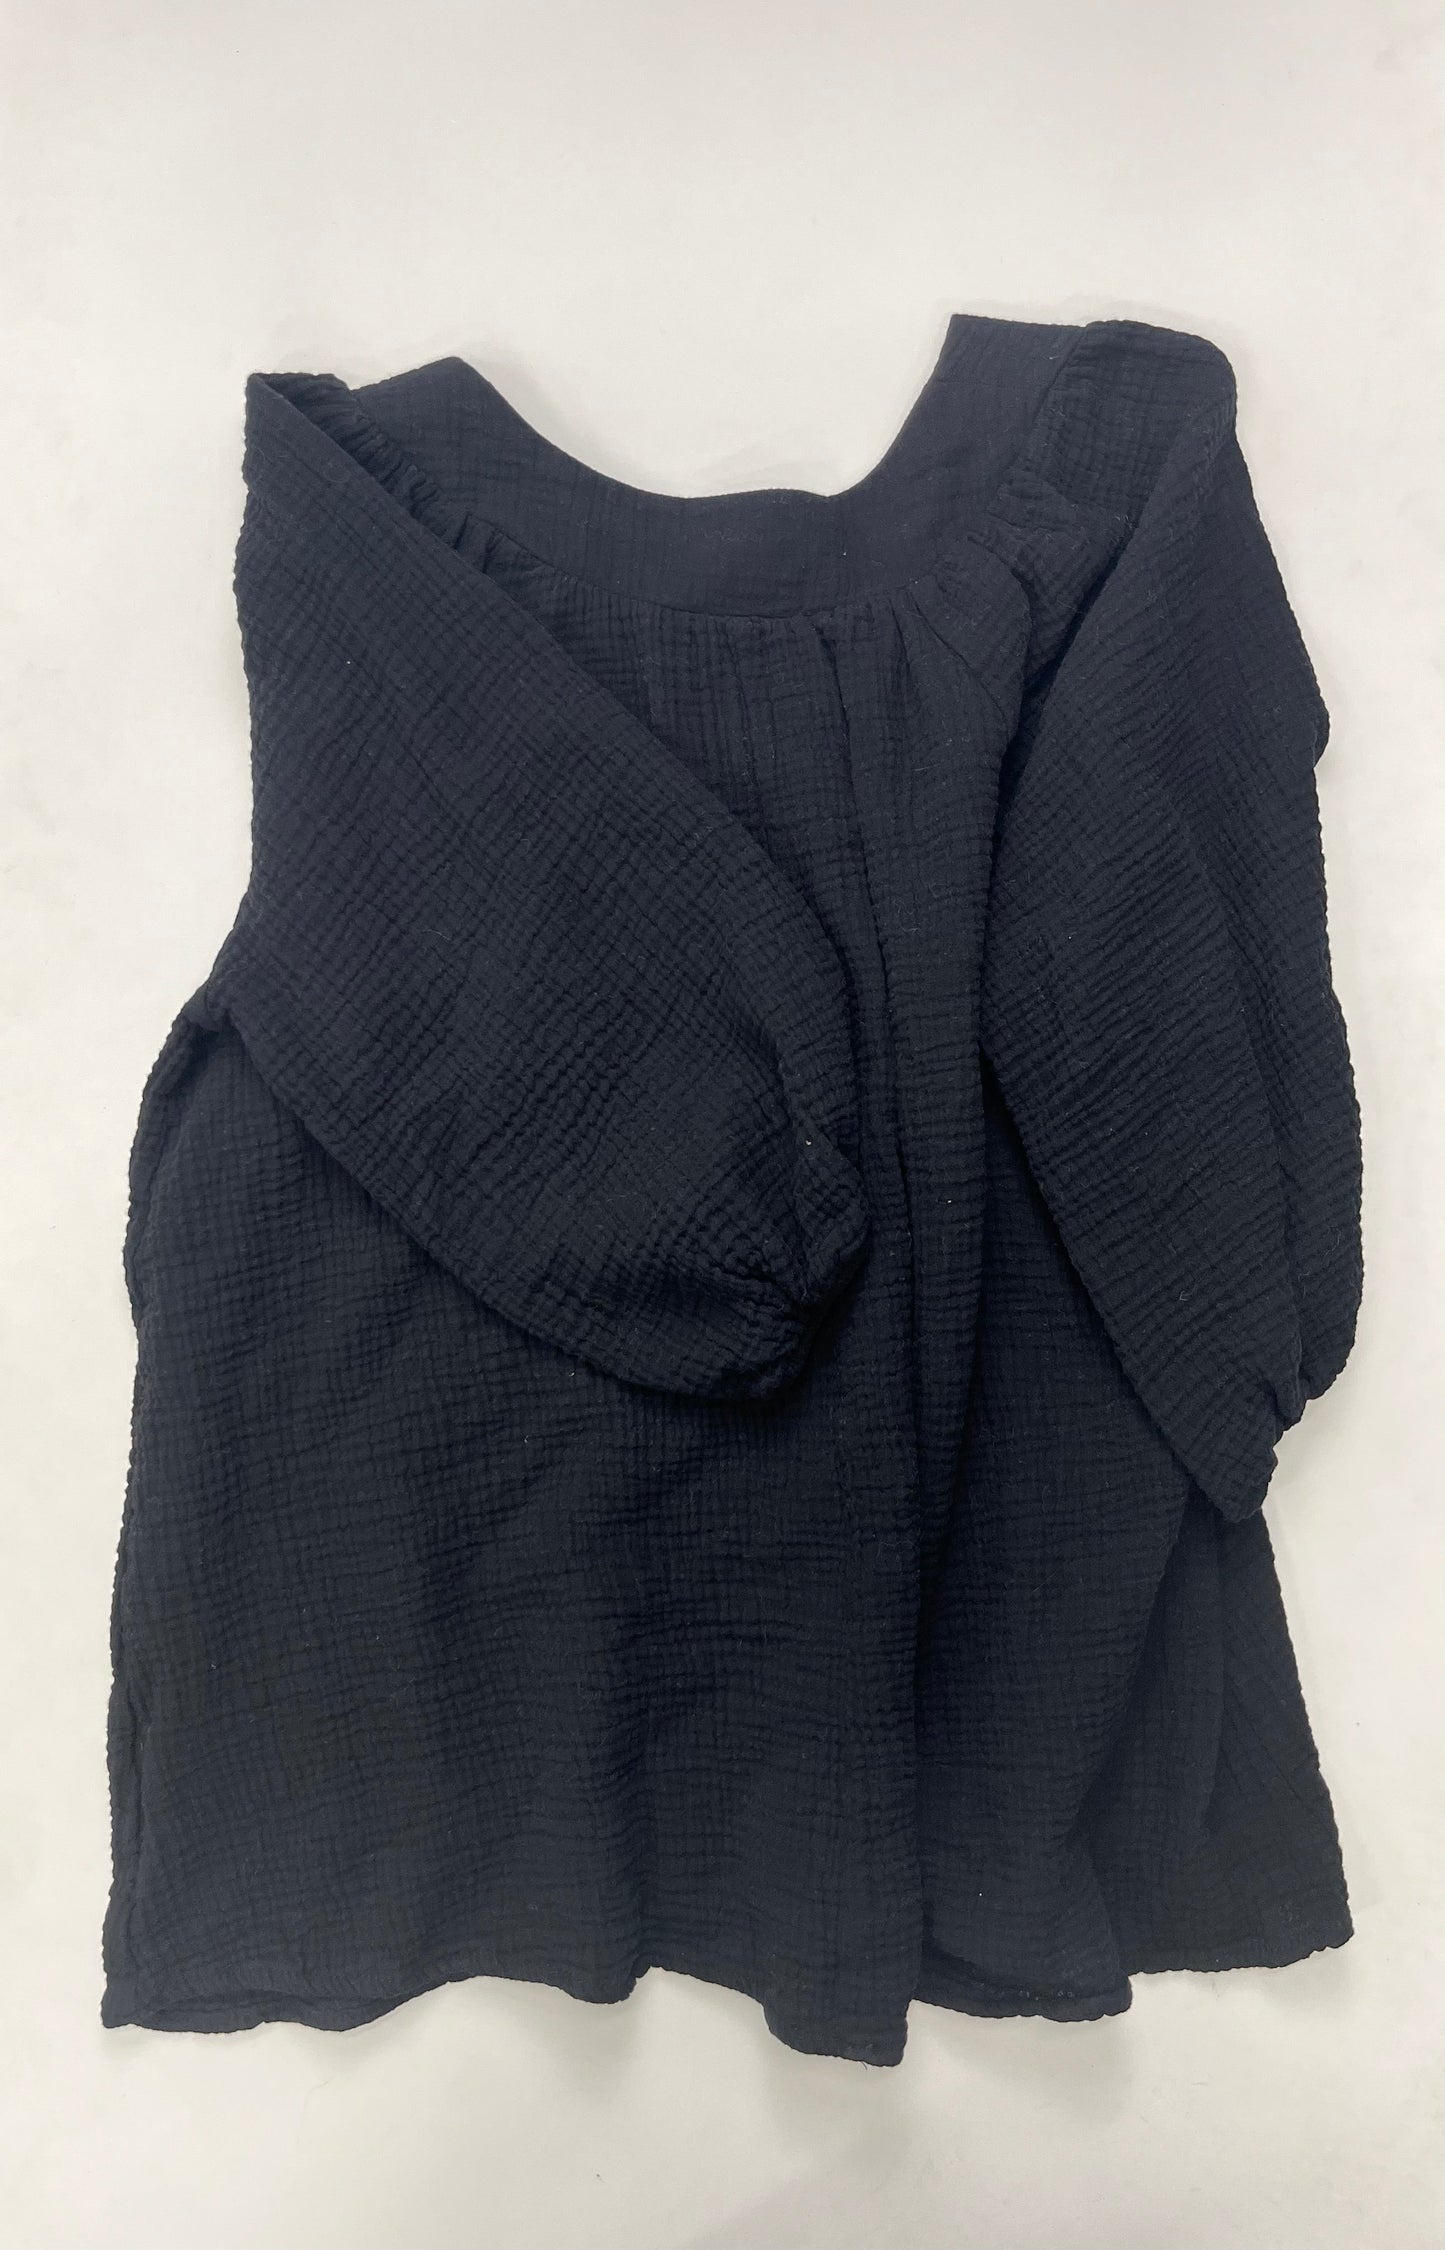 Black Top Long Sleeve Clothes Mentor, Size L